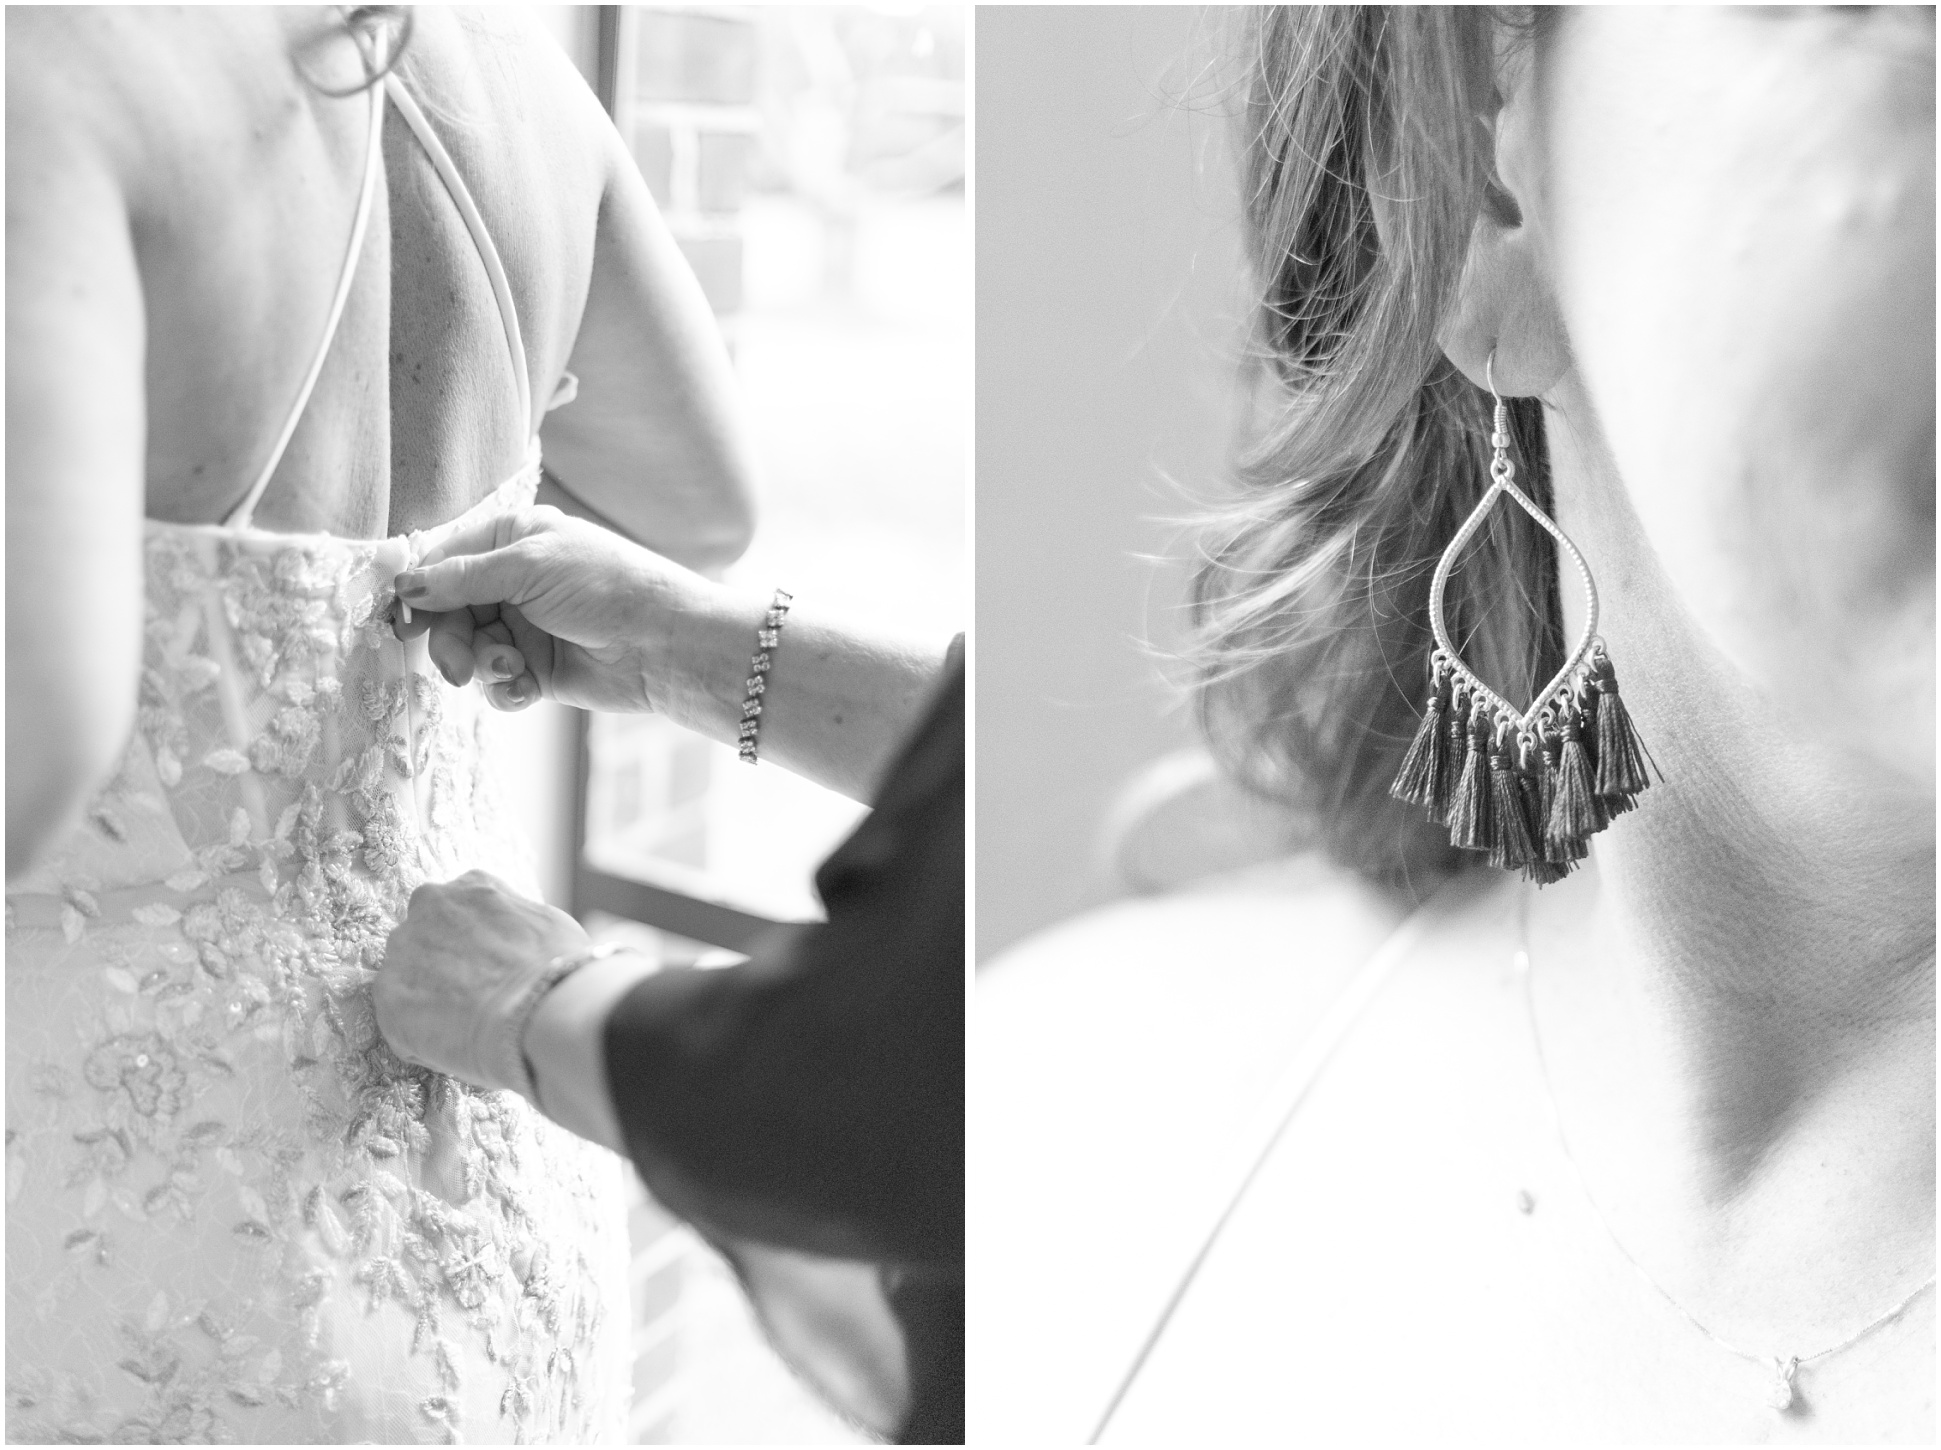 Left: B&W image of mom helping bride into dress, right: close up of bride's earrings